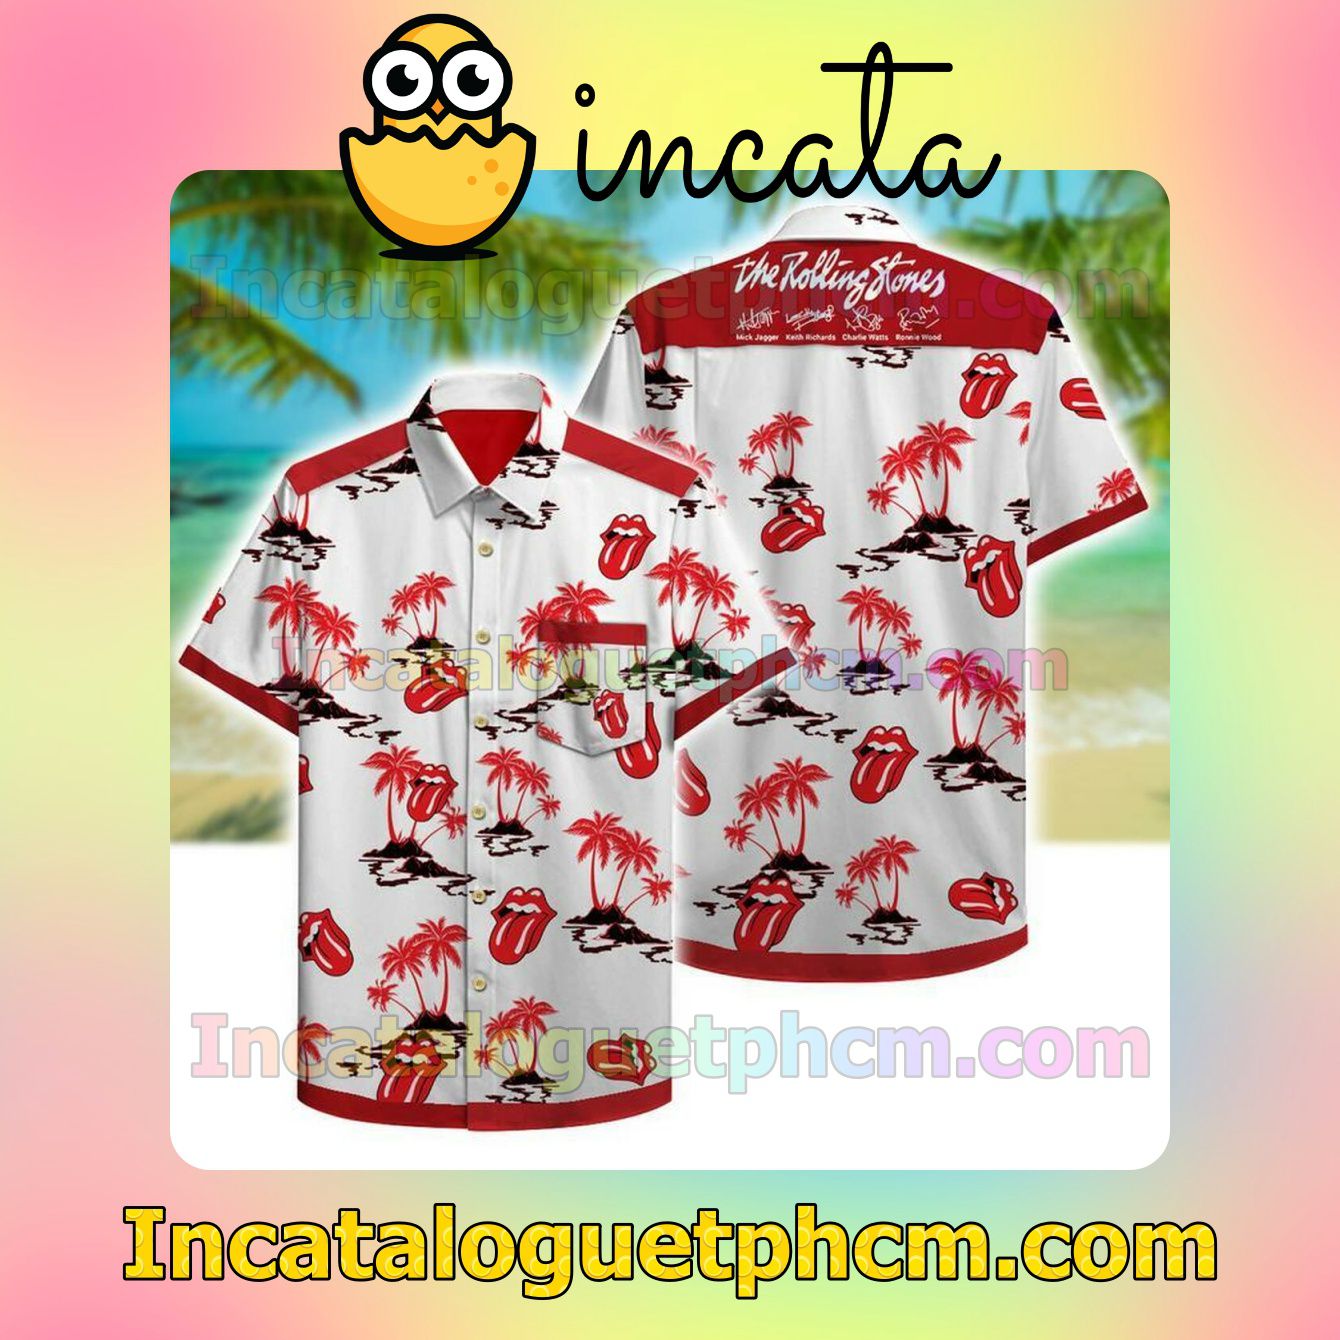 The Rolling Stones Signatures Red Palm Tree White Short Sleeve Shirt